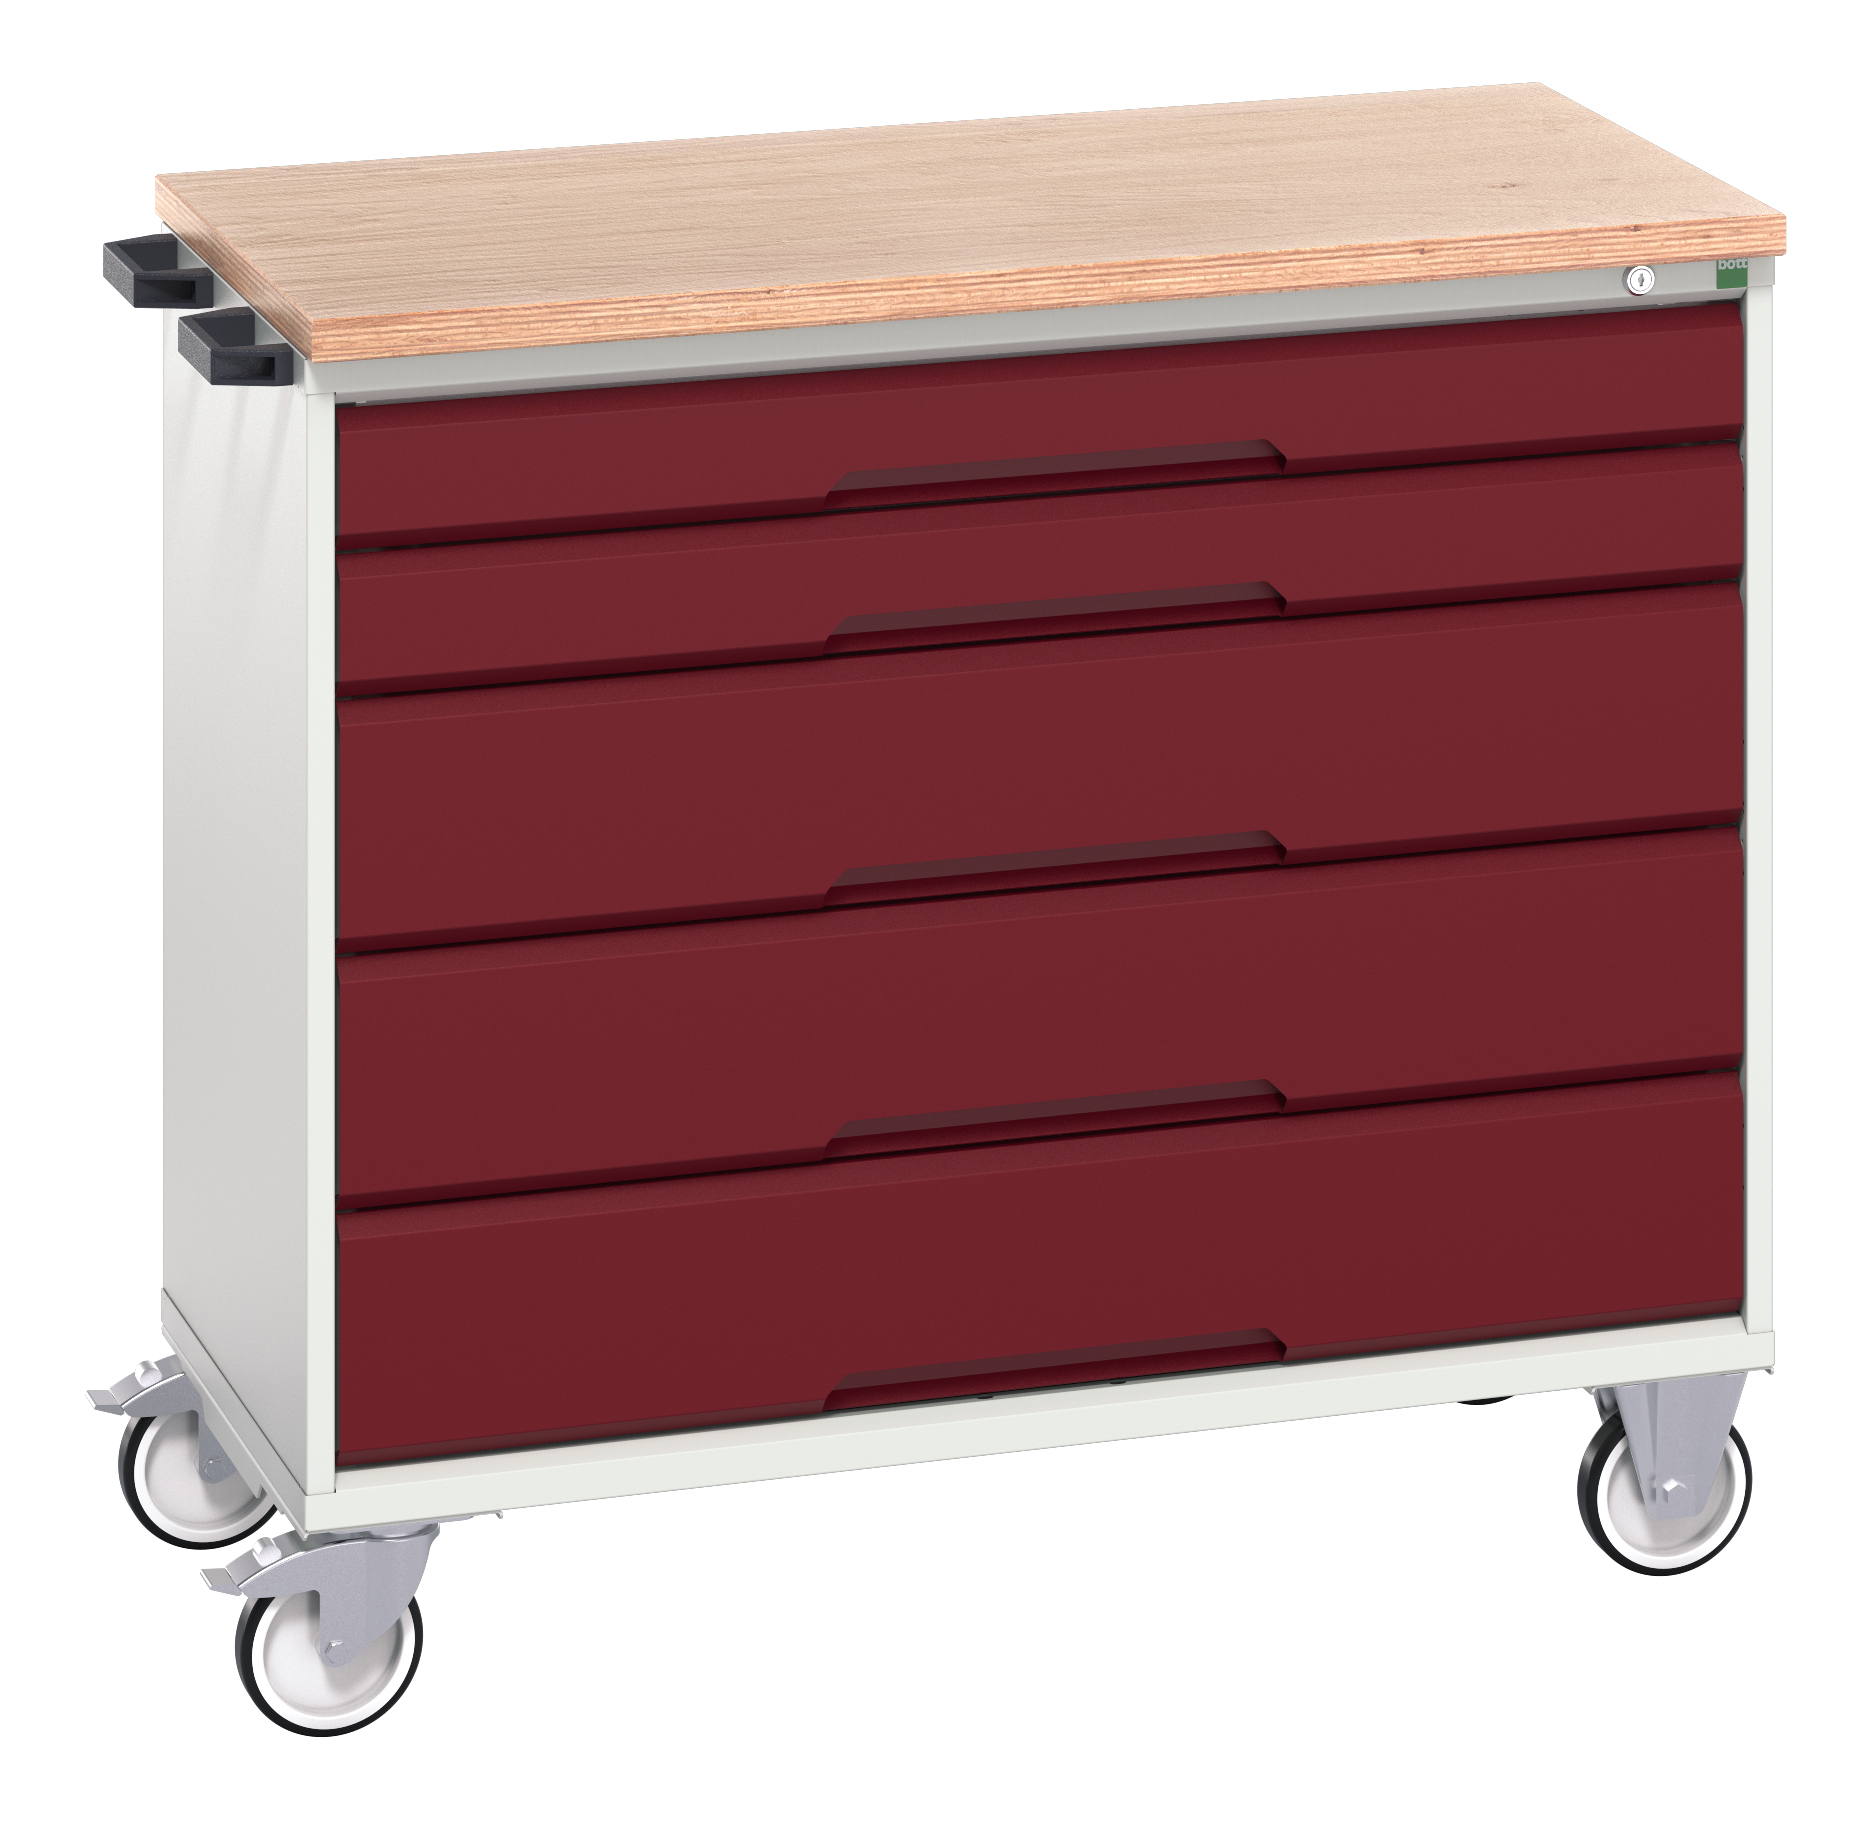 Bott Verso Mobile Drawer Cabinet With 5 Drawers & Multiplex Top - 16927051.24